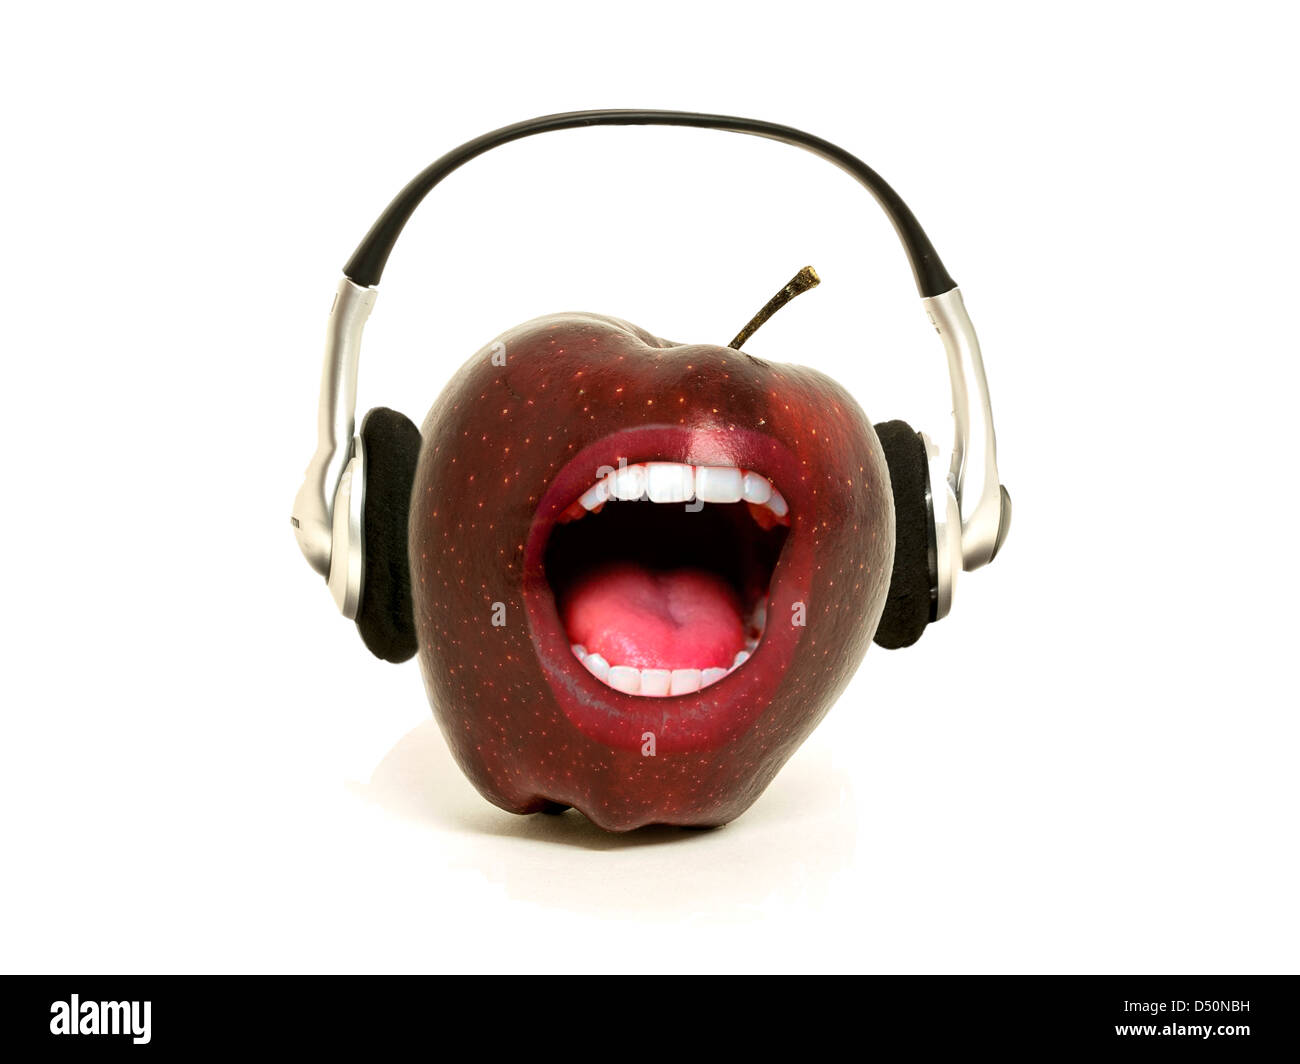 Singing red apple wearing headphones on a white background Stock Photo -  Alamy